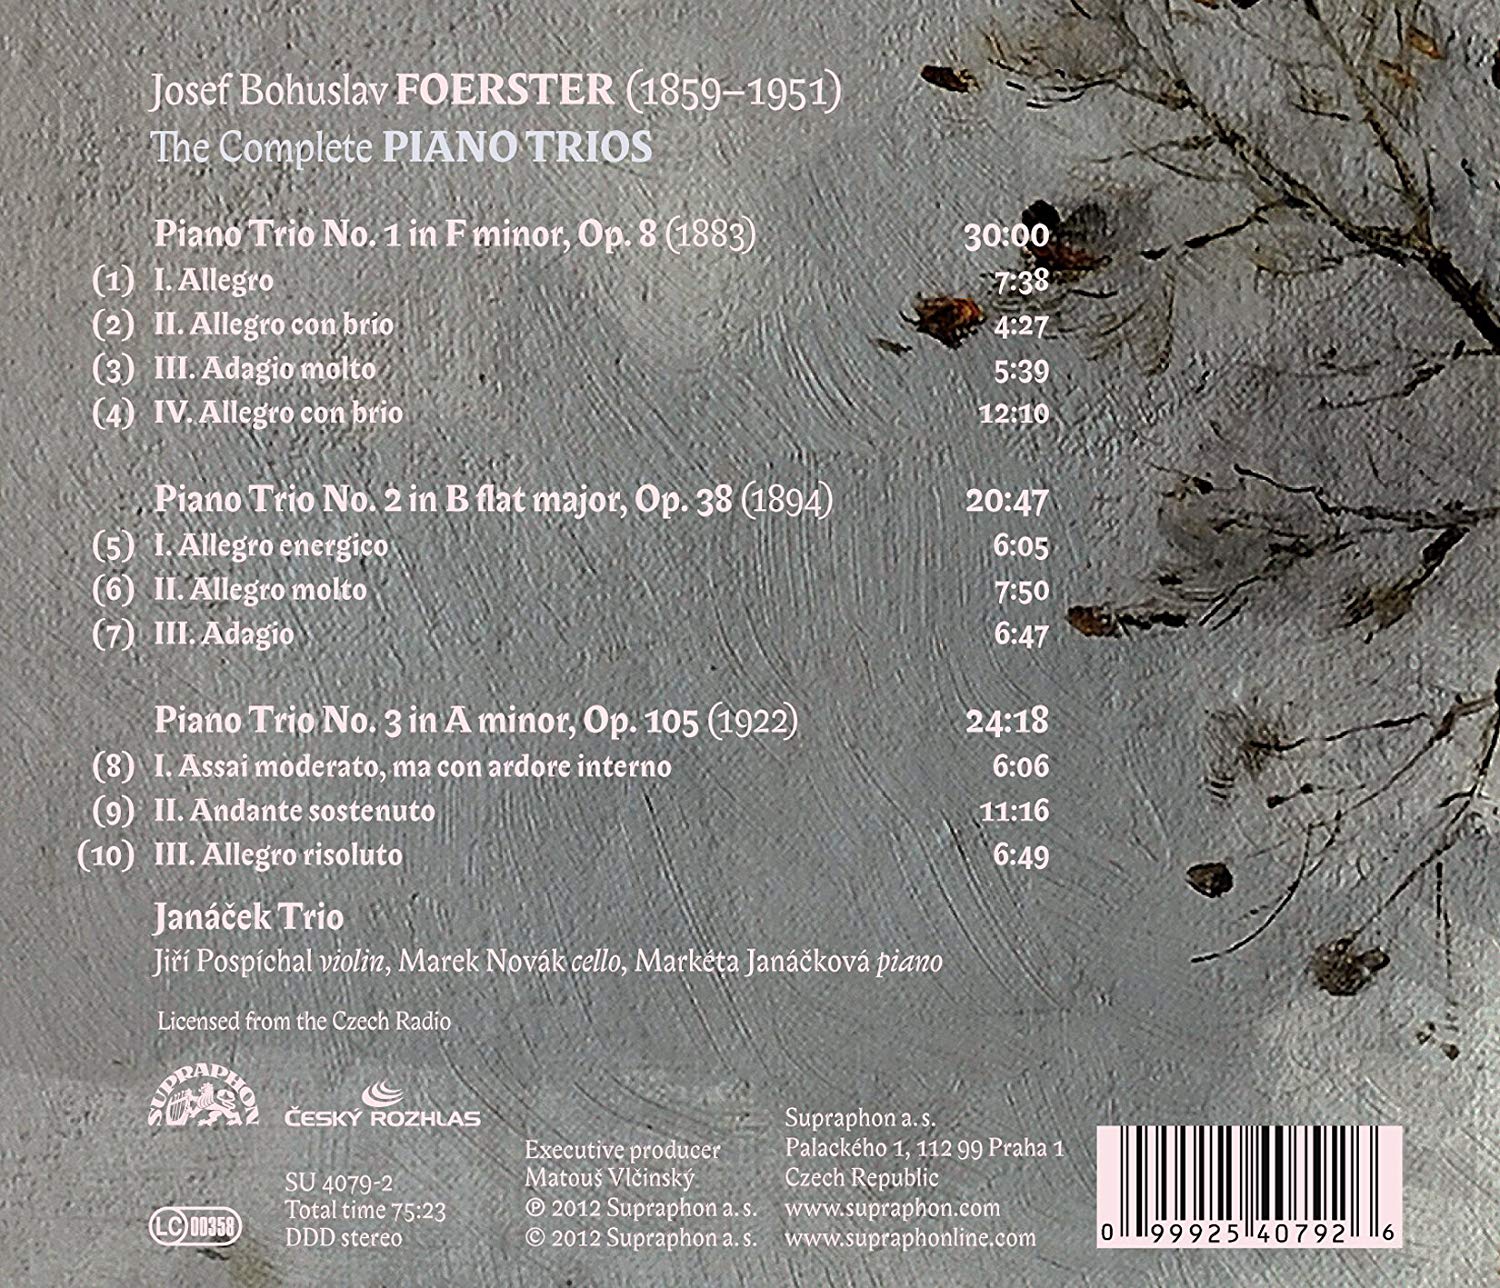 Foerster: The Complete Piano Trios - slide-1